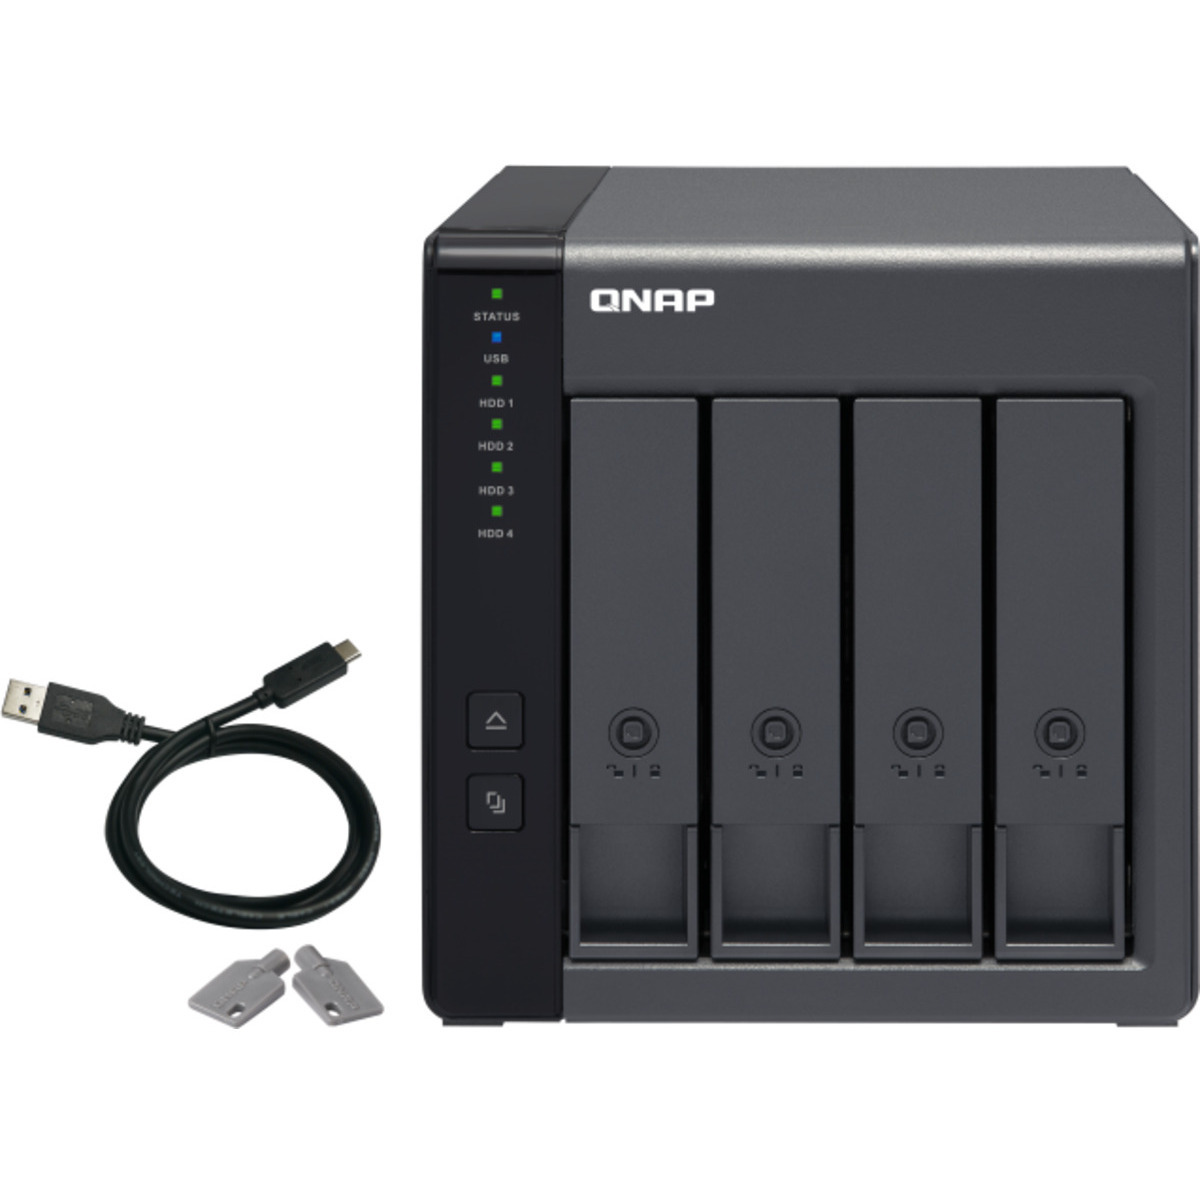 buy $1244 QNAP TR-004 External Expansion Drive 32tb Desktop Expansion Enclosure 4x8000gb Toshiba Enterprise Capacity MG08ADA800E 3.5 7200rpm SATA 6Gb/s HDD ENTERPRISE Class Drives Installed - Burn-In Tested - ON SALE - nas headquarters buy network attached storage server device das new raid-5 free shipping usa christmas new year holiday sale TR-004 External Expansion Drive